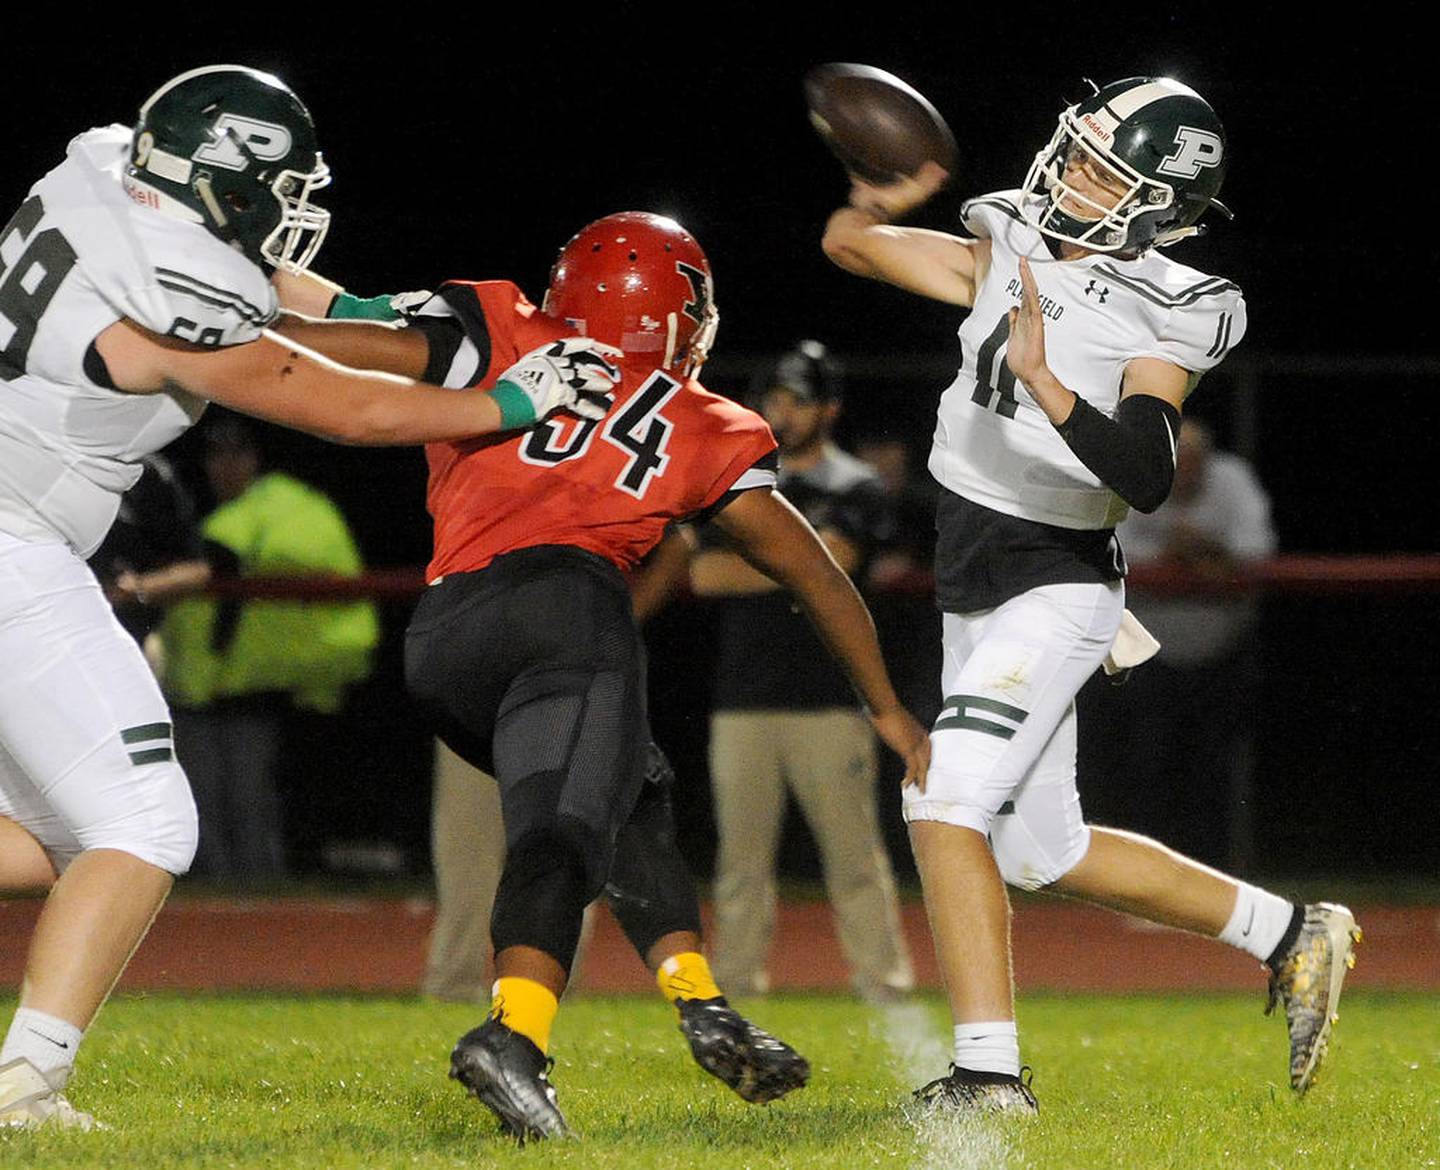 Plainfield Central quarterback Chris Leto (11) throws a pass under pressure from Yorkville defensive lineman George Alba (54) during a varsity football game at Yorkville High School on Sept. 13.